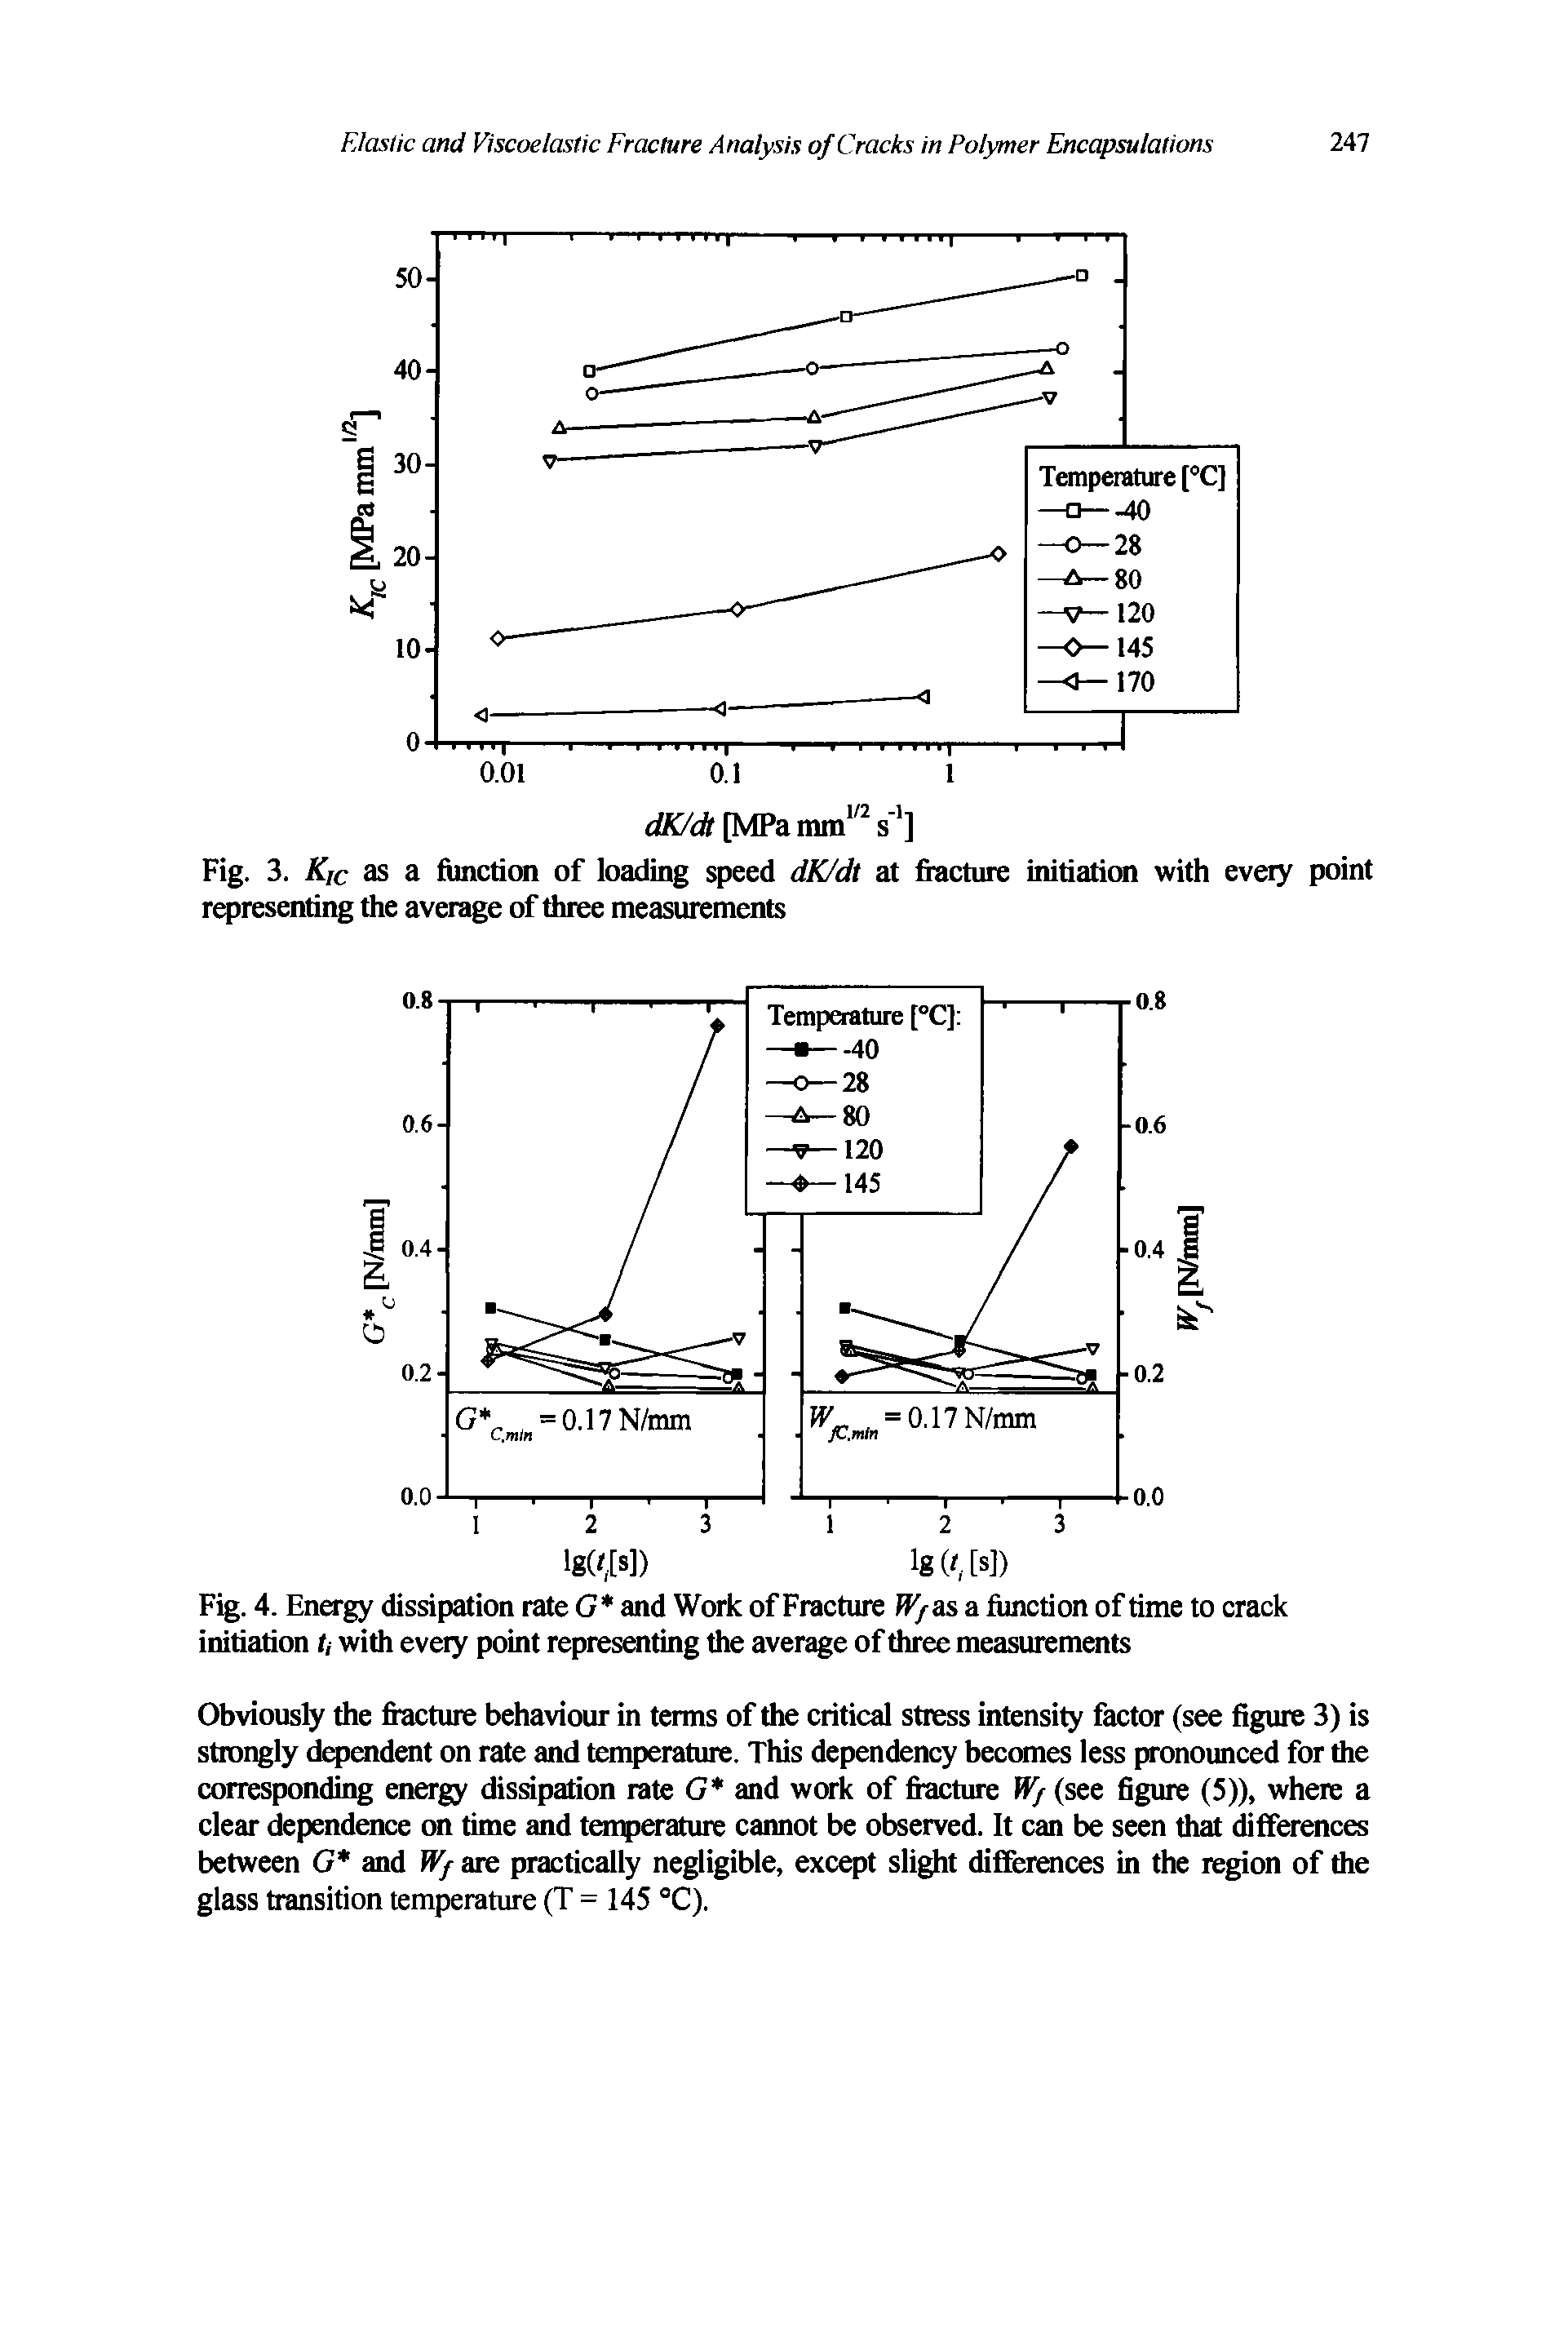 Fig. 4. Energy dissipation rate G and Work of Fracture iV/asa function of time to crack initiation u with eveiy point represaiting the average of three measurements...